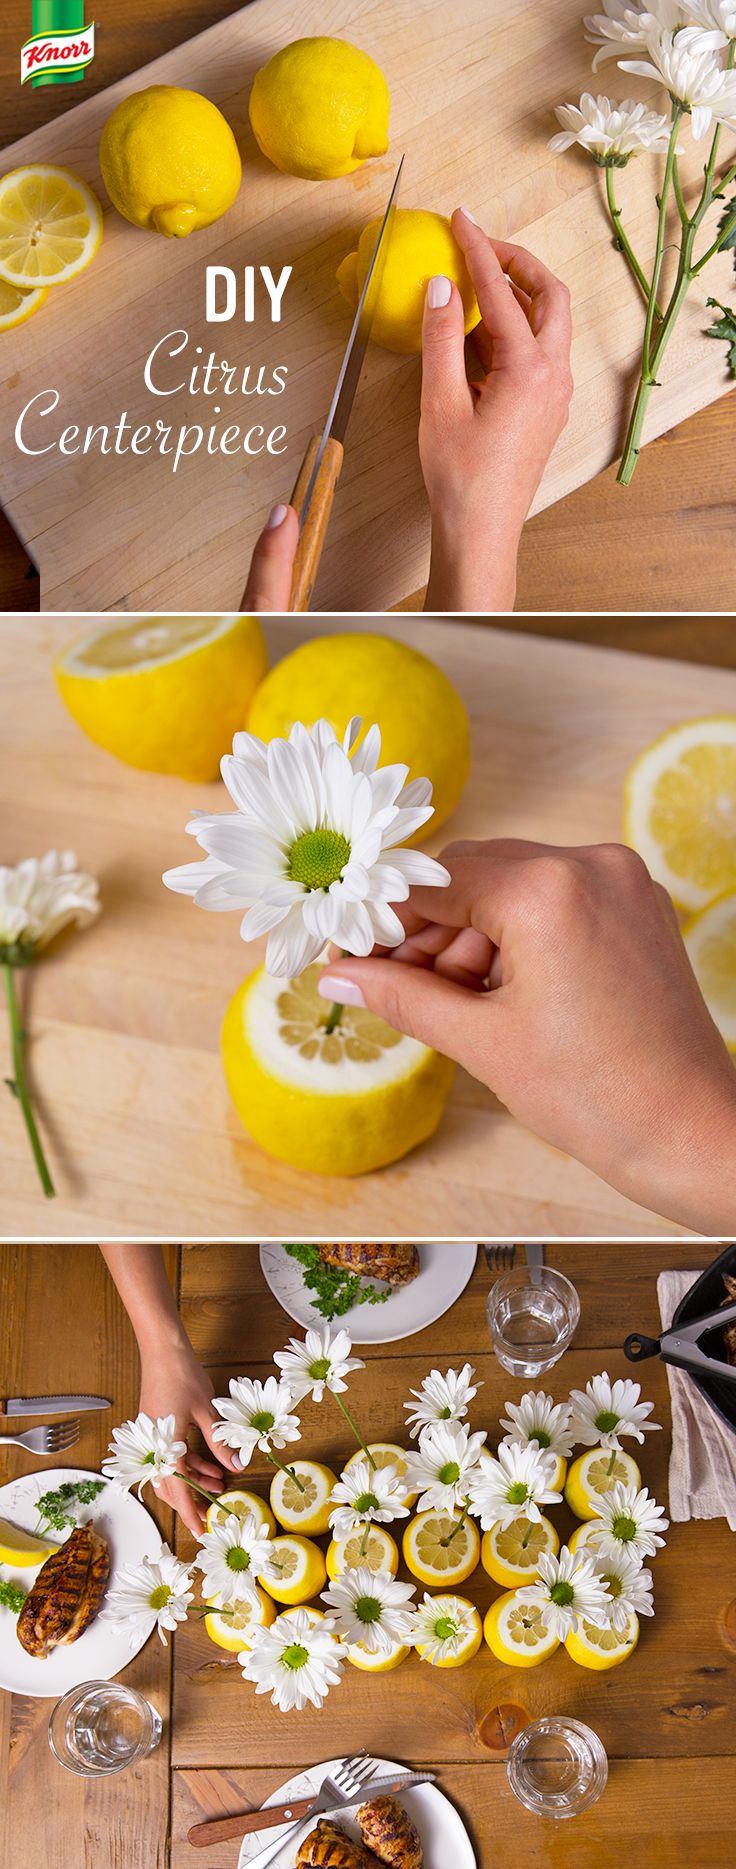 Want a show-stopping yet simple party table decorating idea? Knorr knows the best summer season centerpiece. Place your favorite